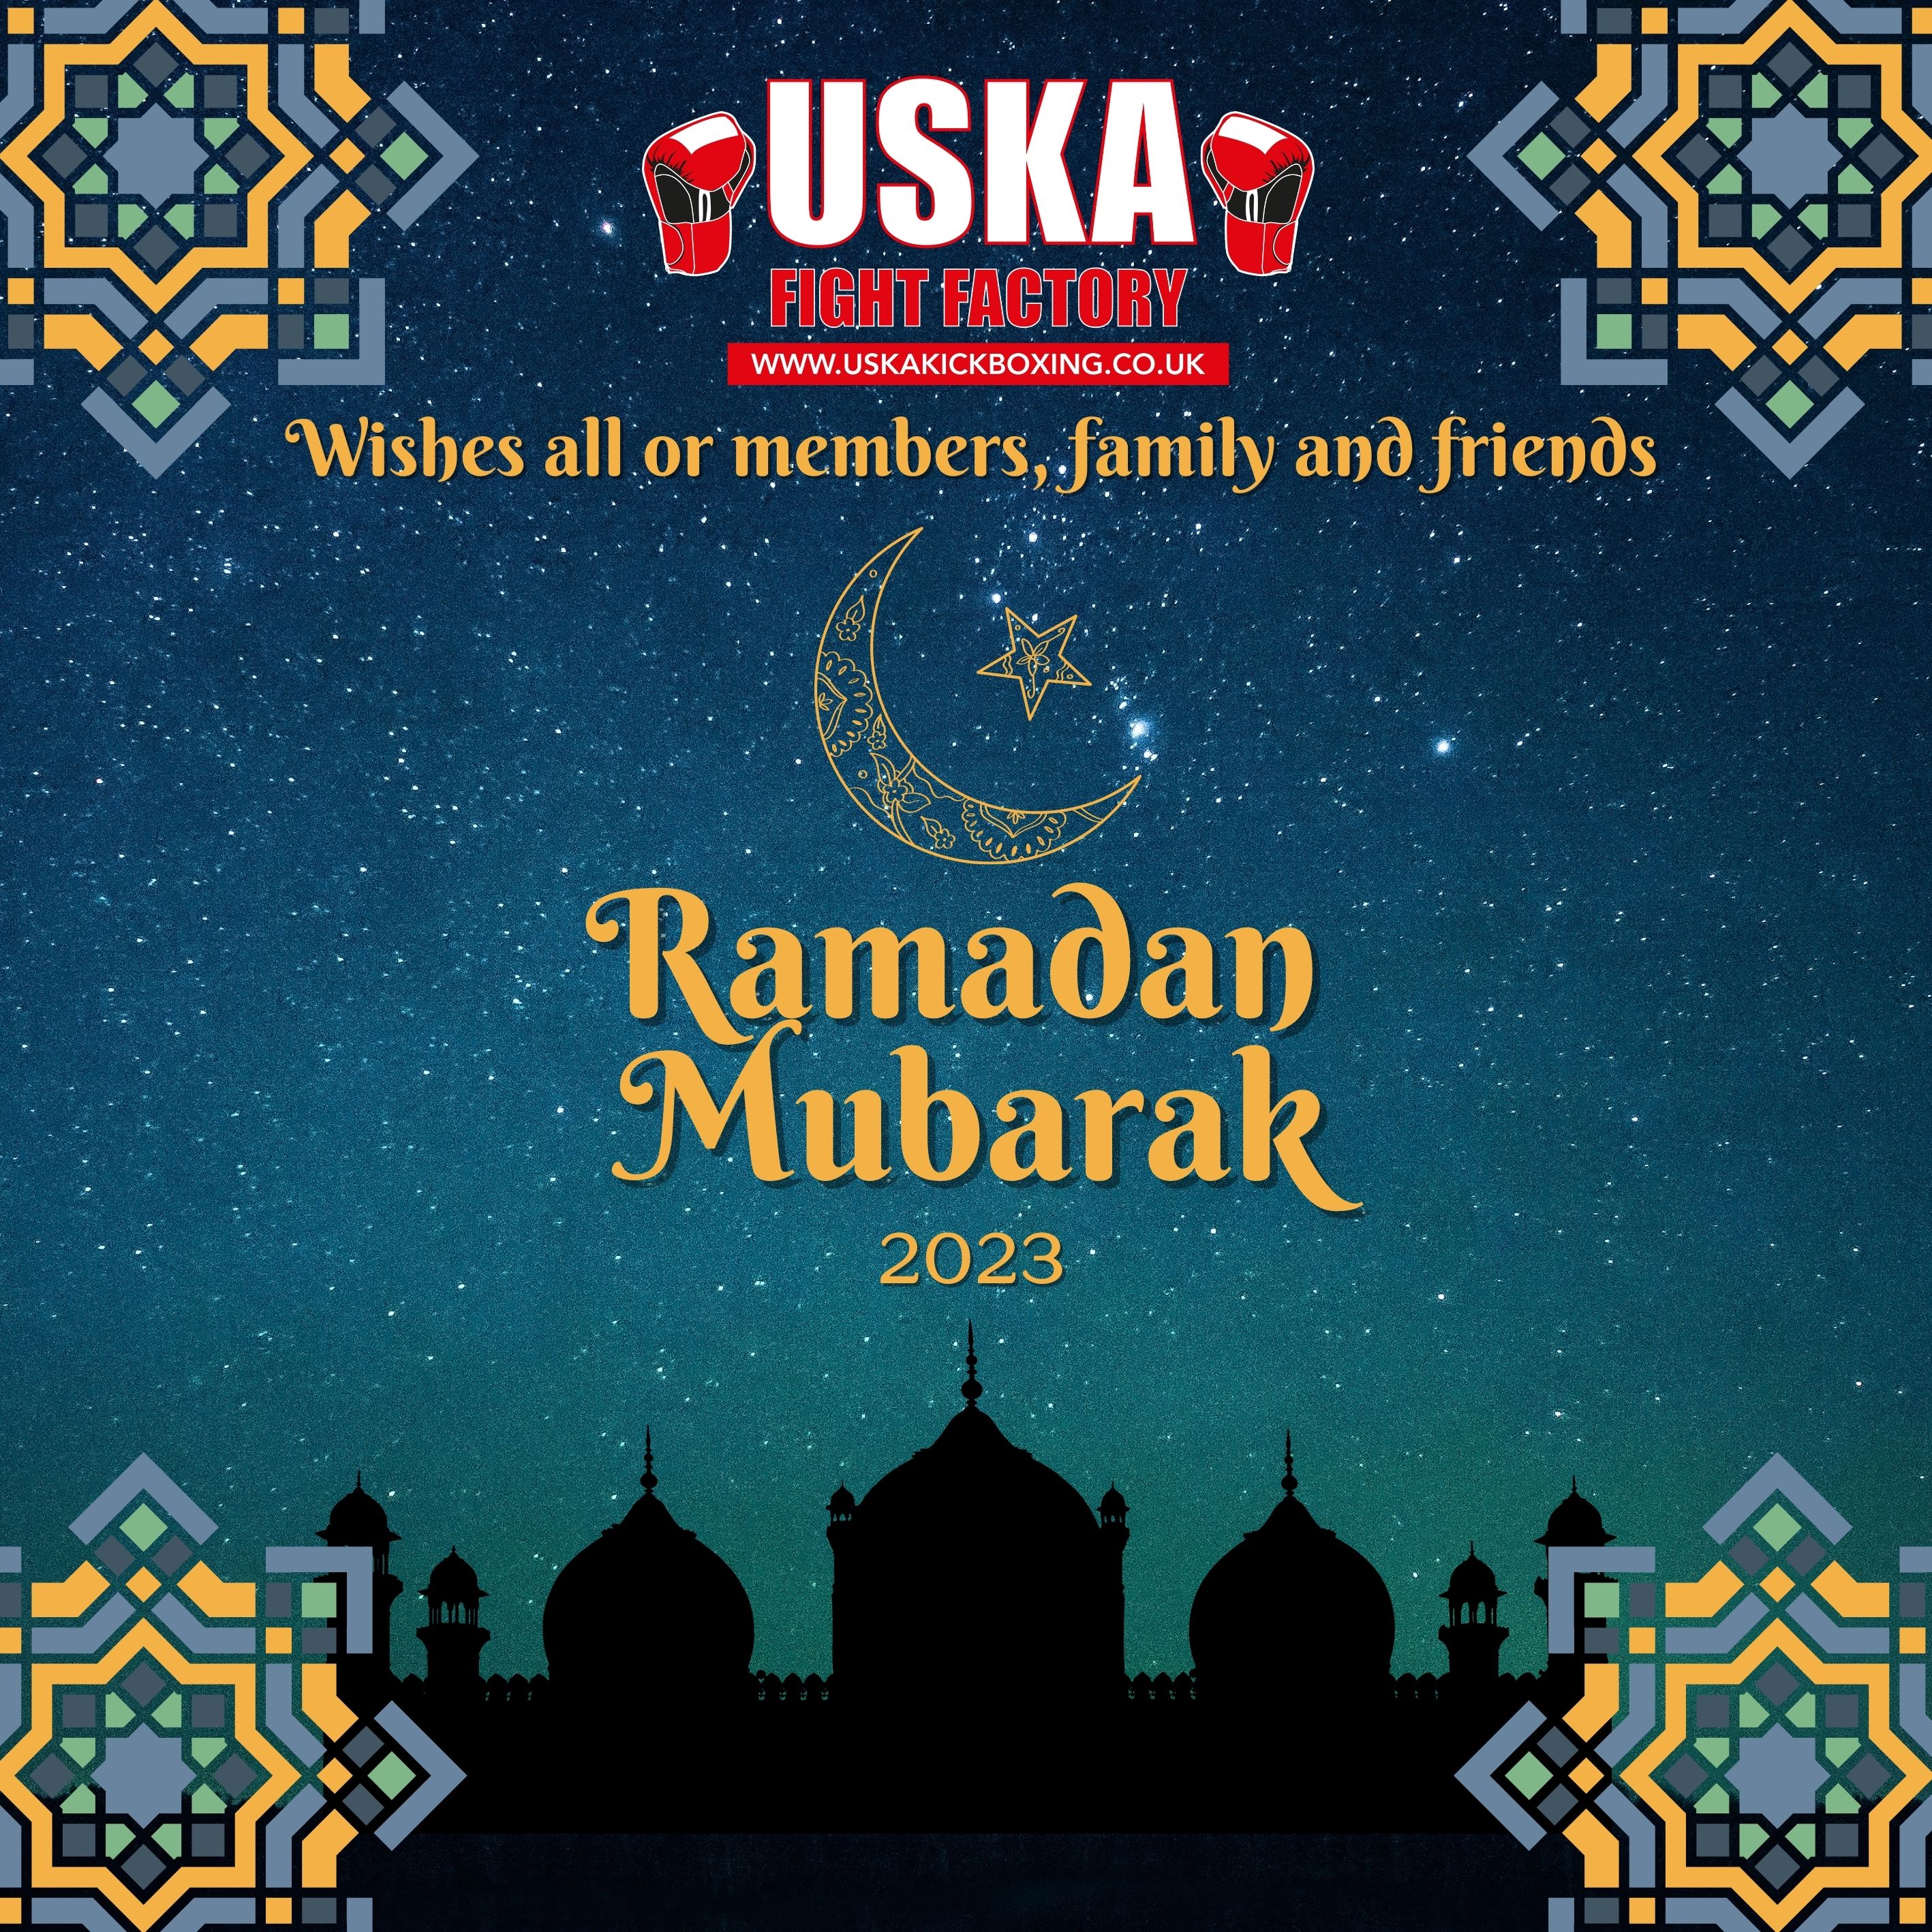 22-03-23 - Ramadan Mubarak to all our members, family, student and friends